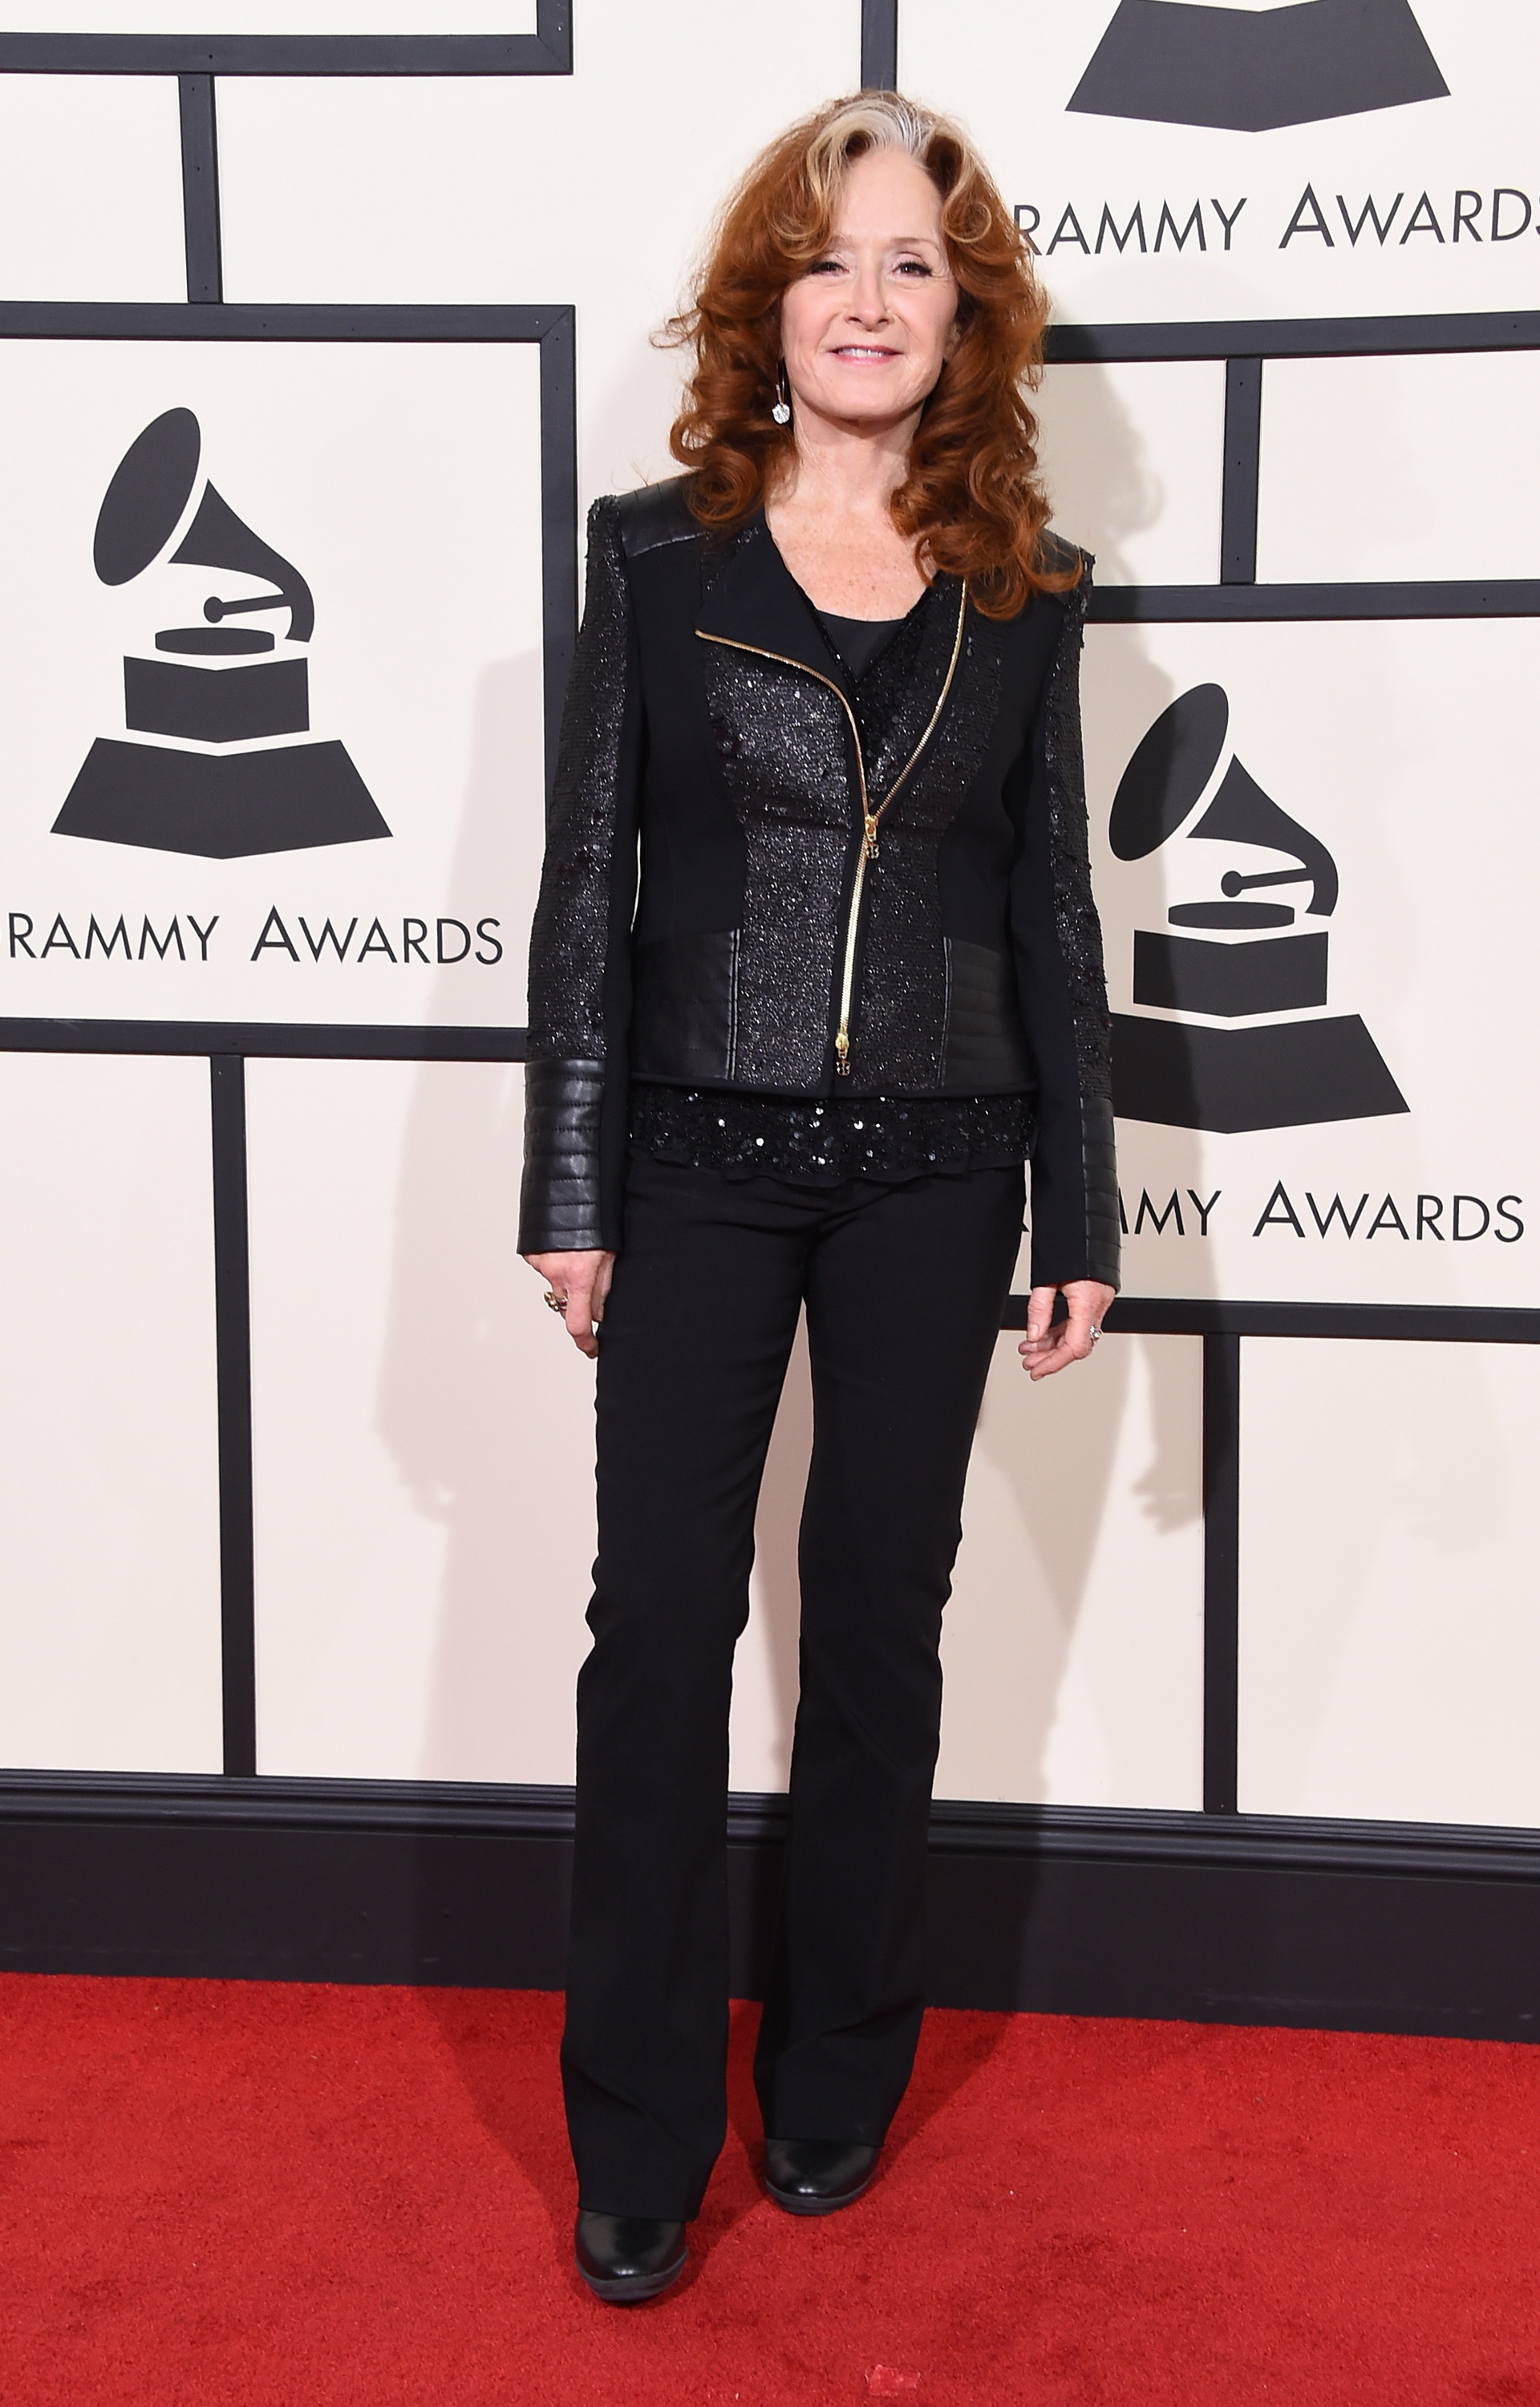 Bonnie Raitt attends the 58th GRAMMY Awards at Staples Center on Feb. 15, 2016 in Los Angeles.